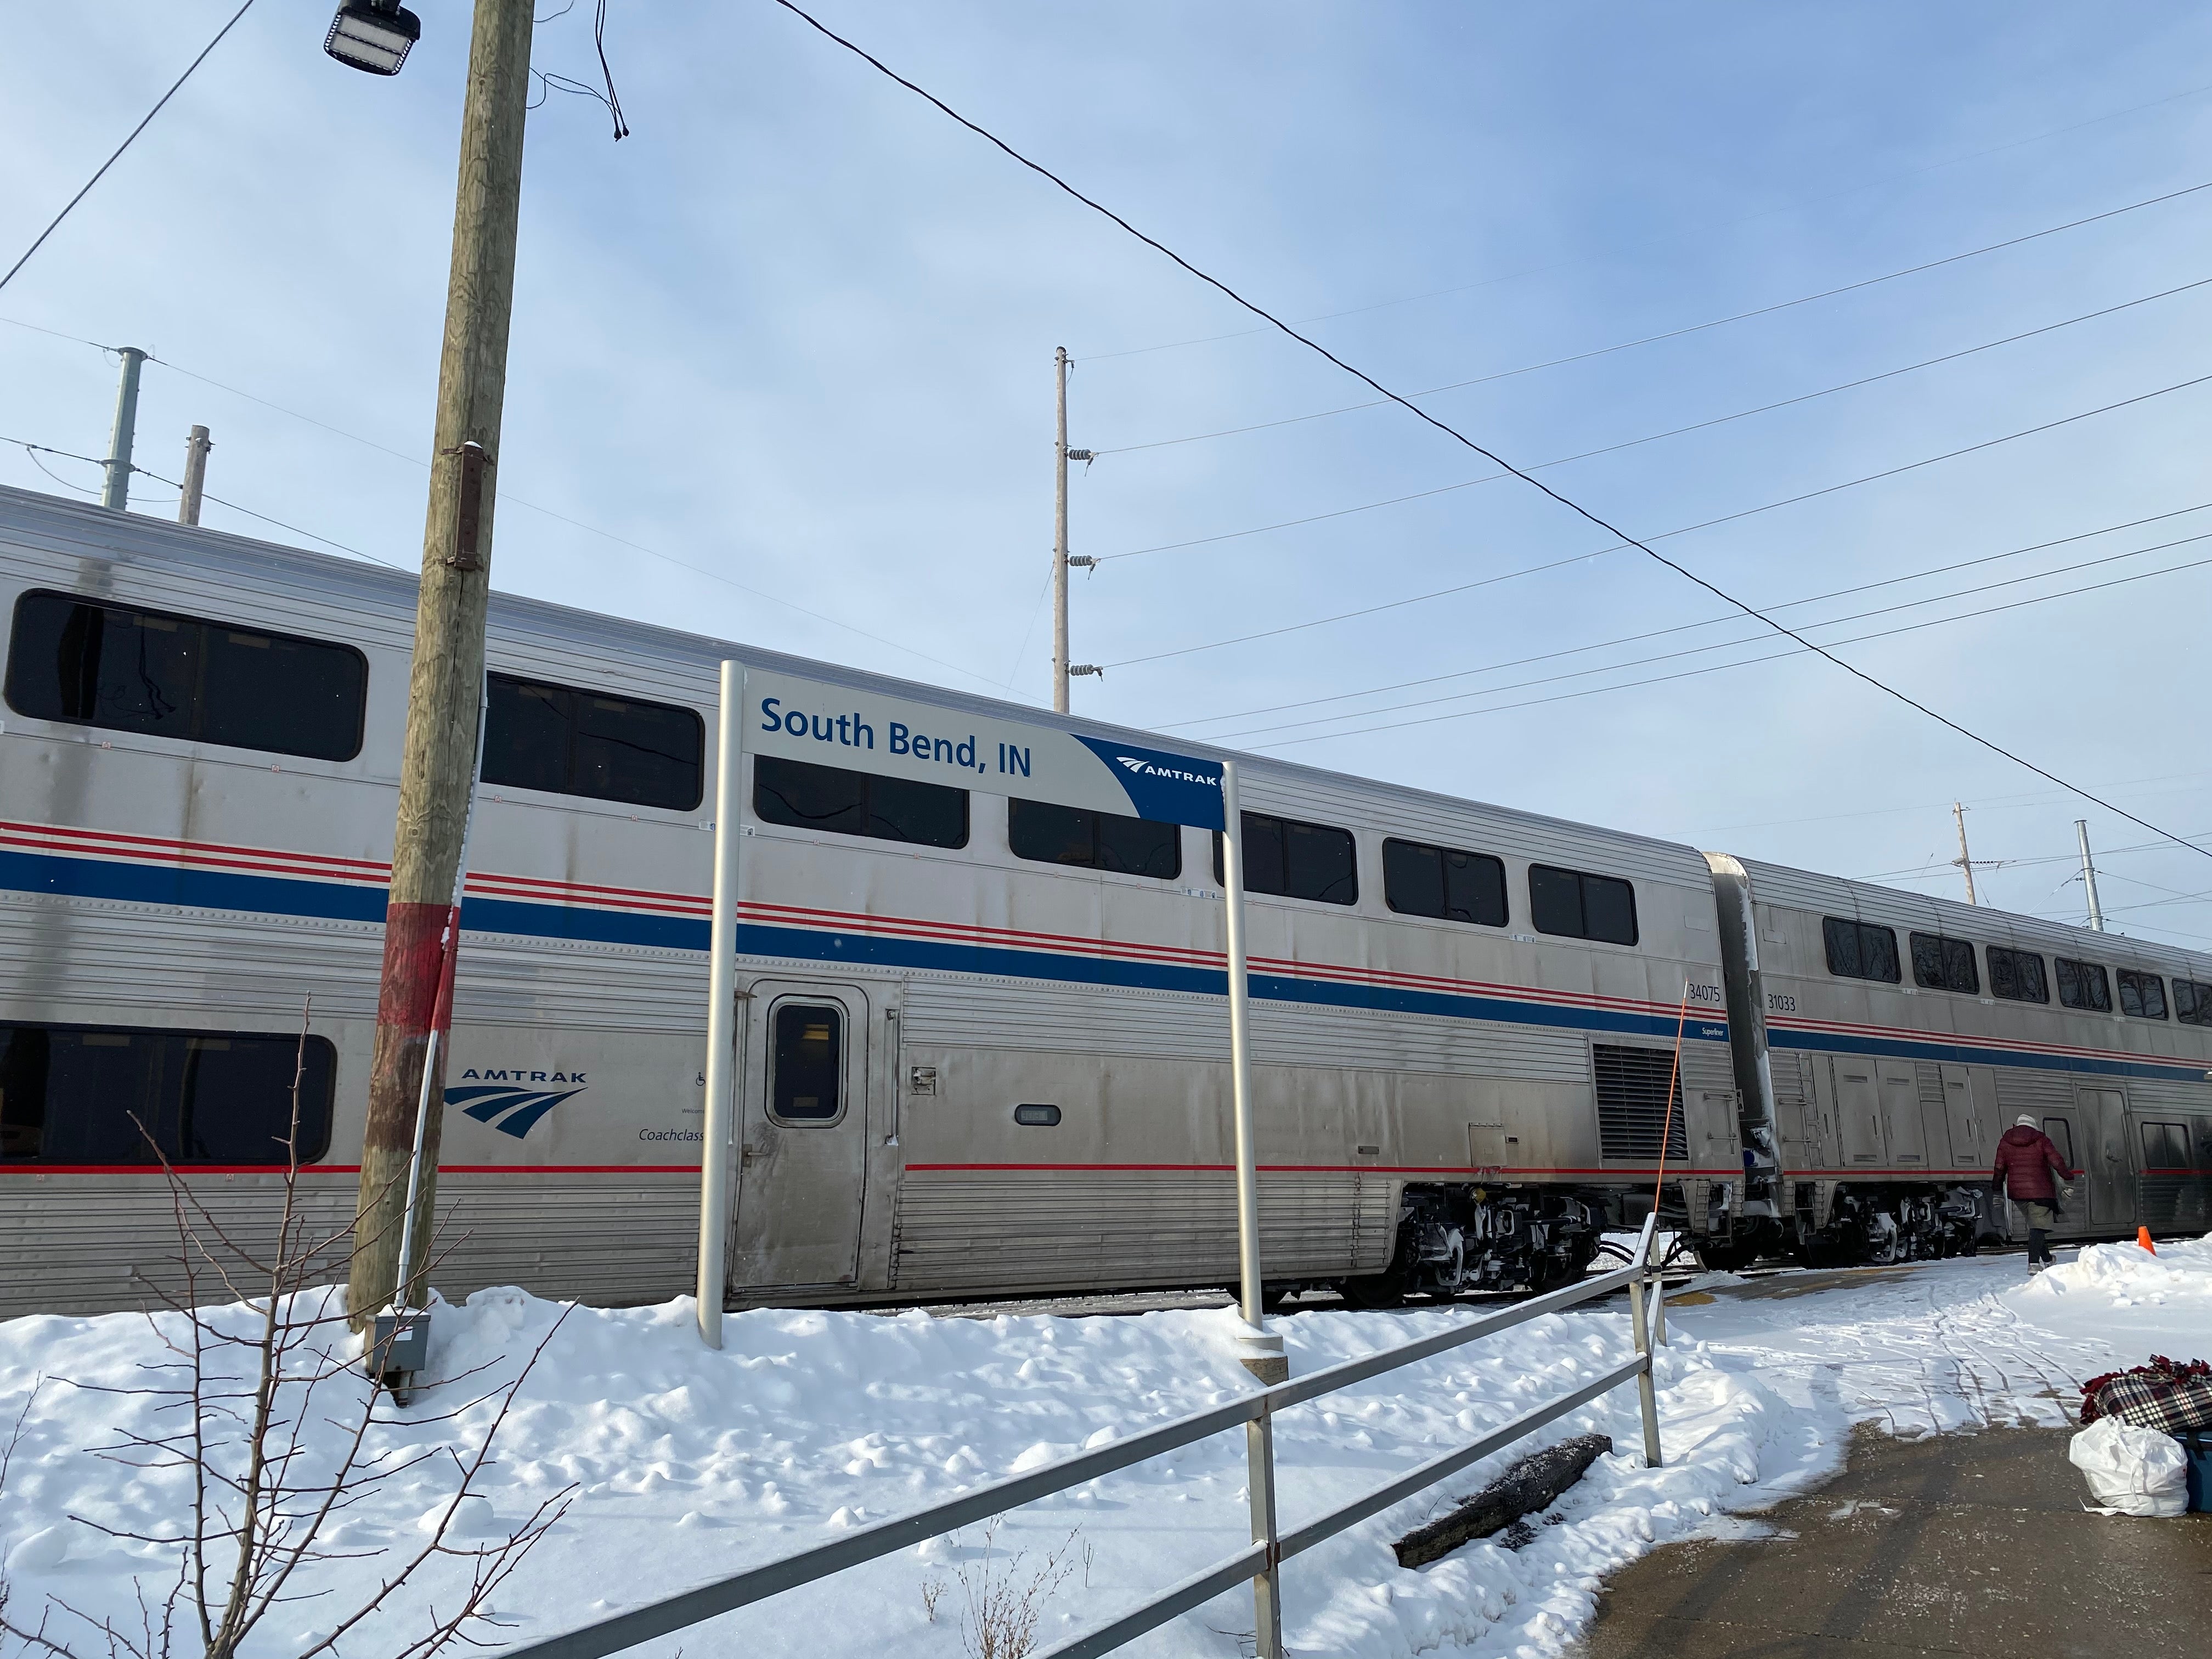 South Bend, Indiana – after 22 hours on a train